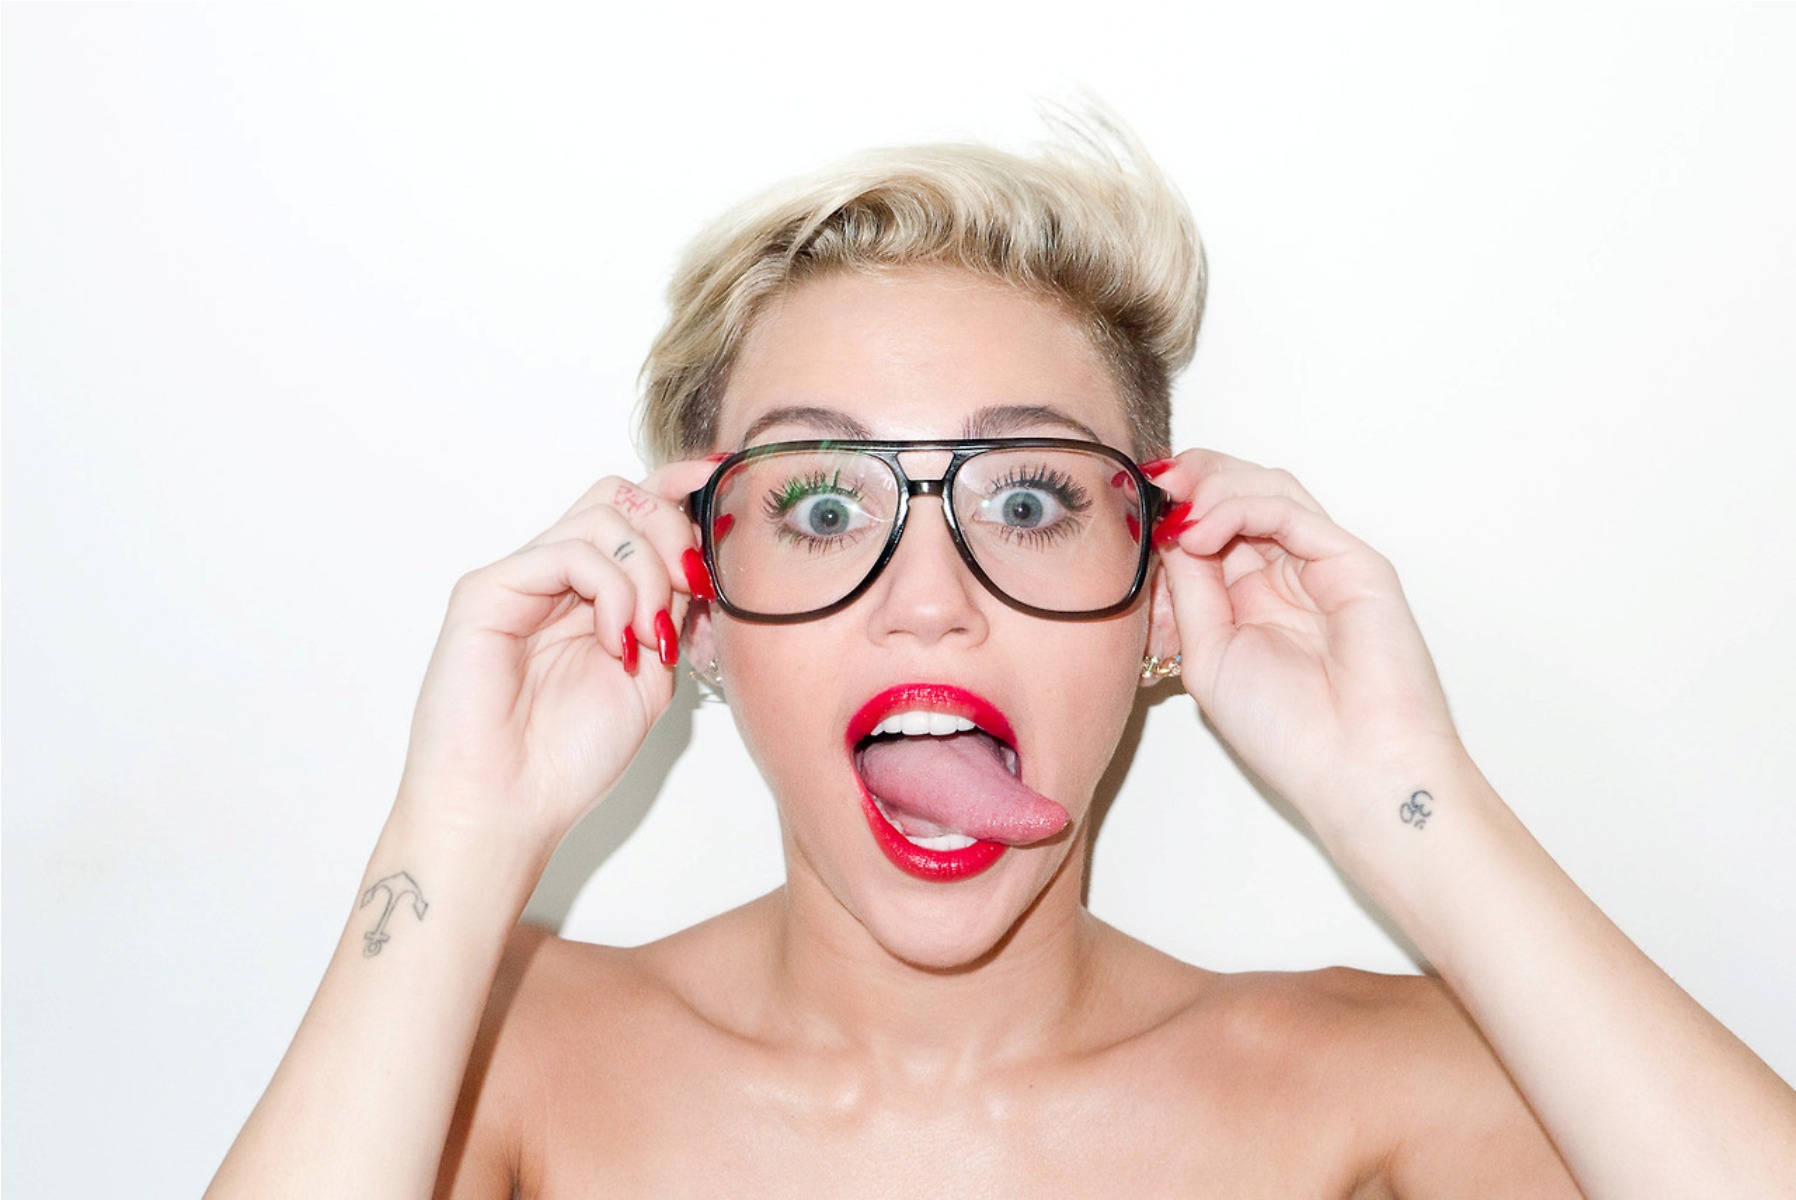 Miley Cyrus Showing Her Goofy Side